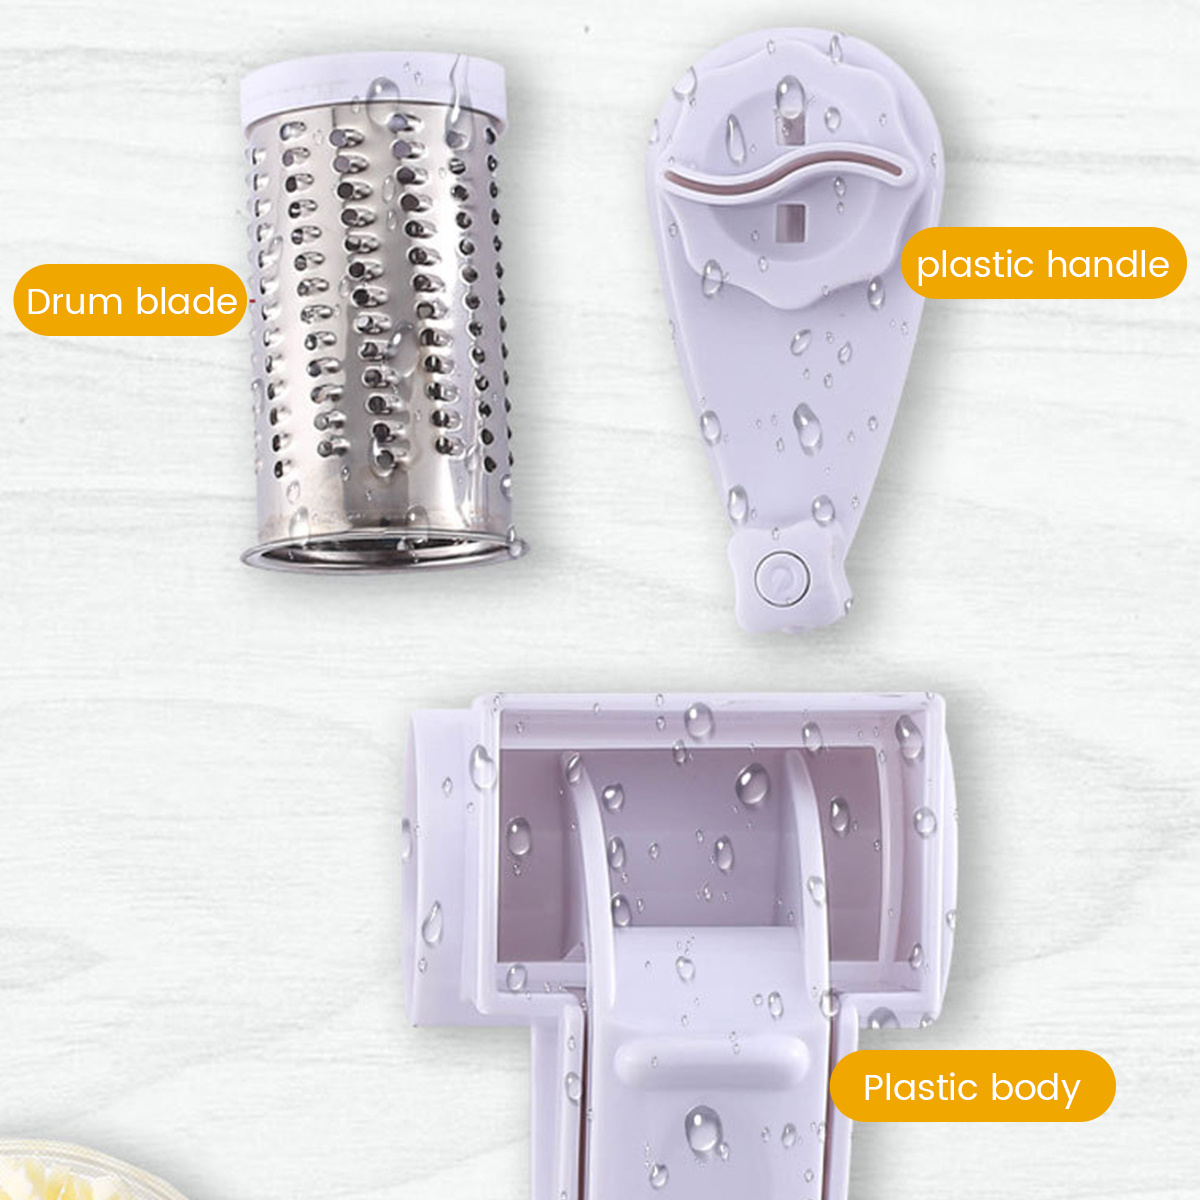 Zyliss Classic Cheese Grater - Rotary Cheese Grater - Handheld Cheese Grater